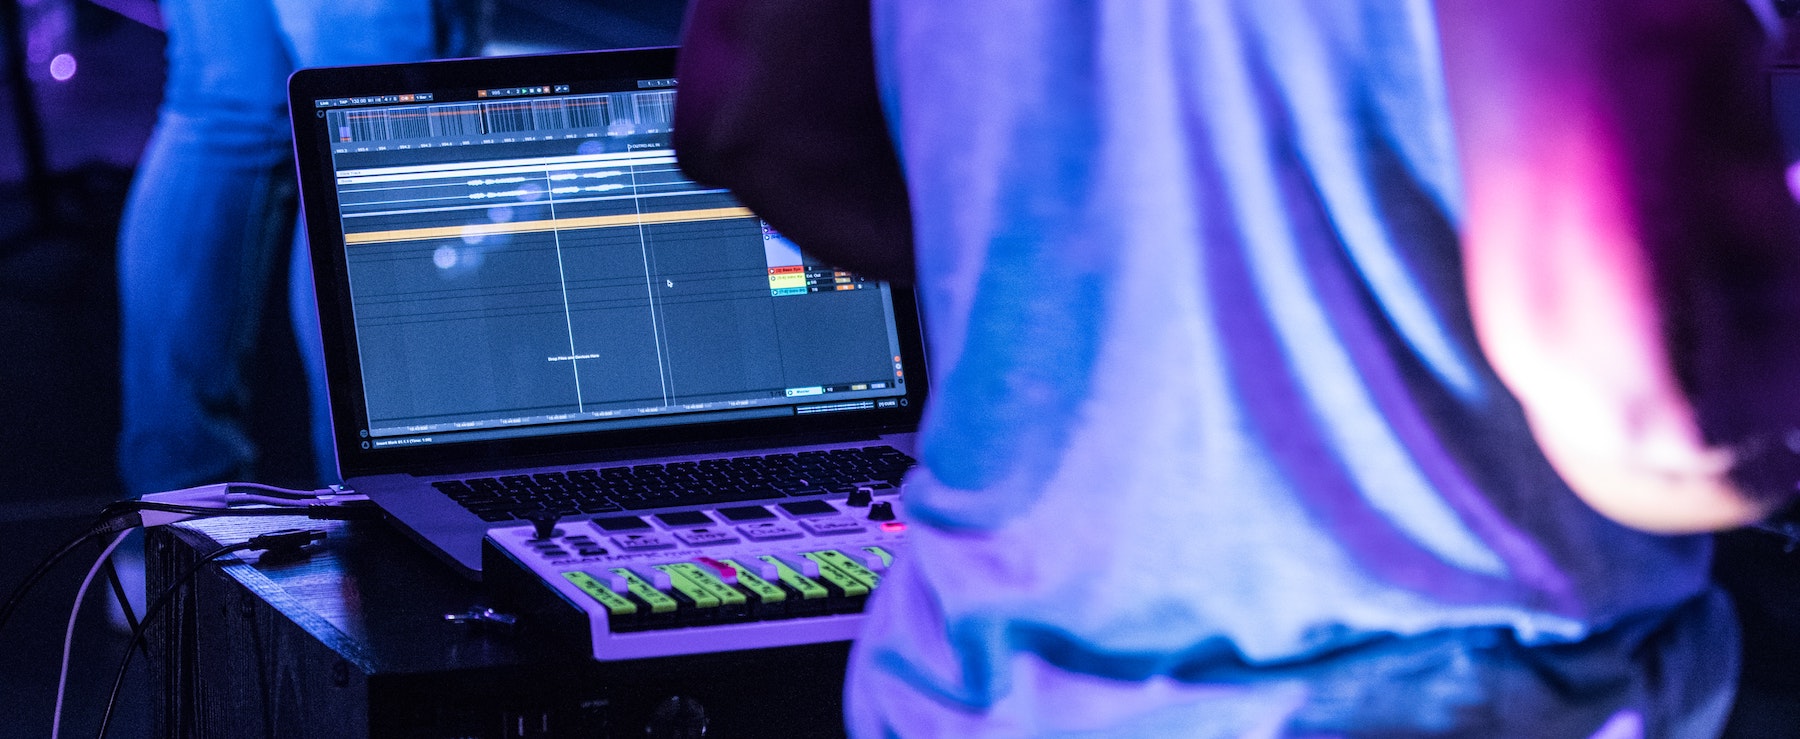 Laptops are Good For Music Production